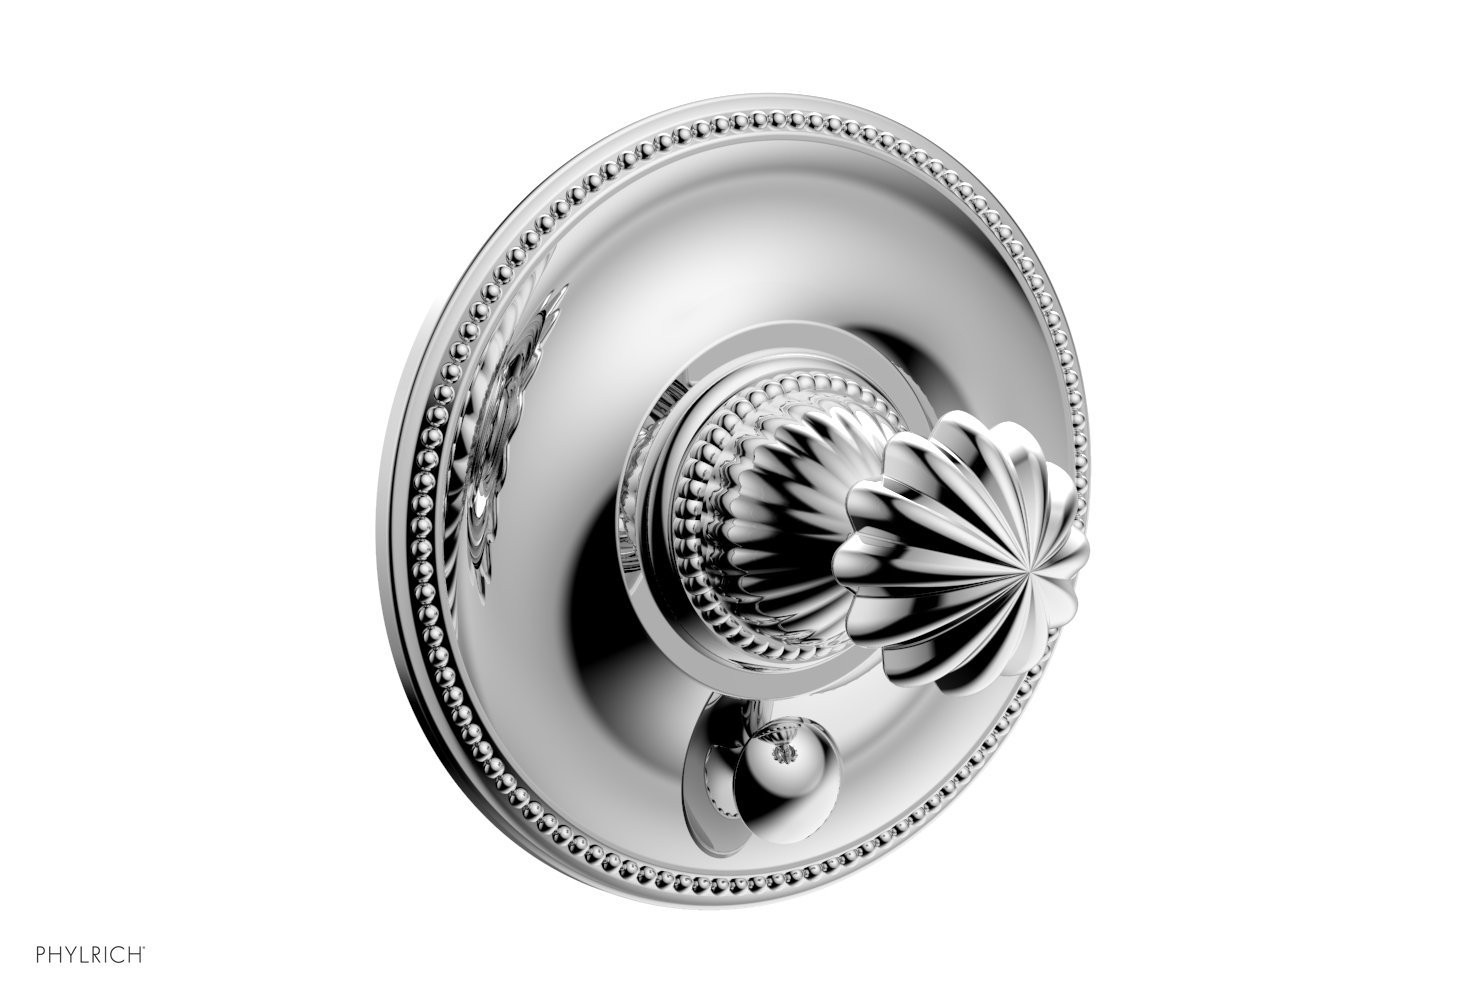 PHYLRICH PB2361TO GEORGIAN & BARCELONA ROUND HANDLE PRESSURE BALANCE SHOWER PLATE WITH DIVERTER AND HANDLE TRIM